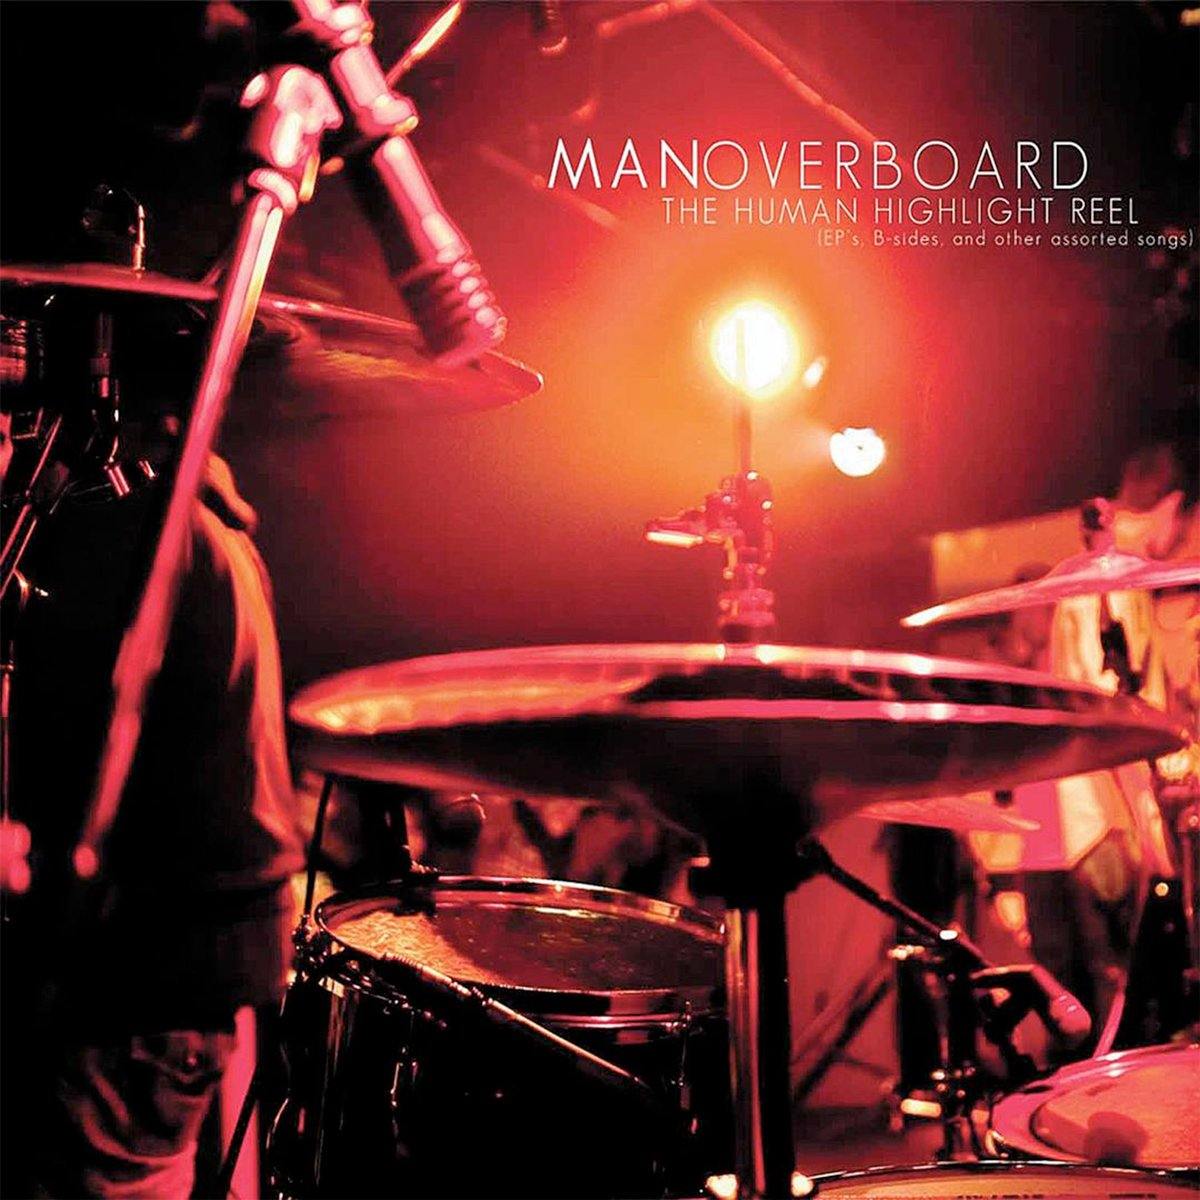 Buy – Man Overboard "The Human Highlight Reel" CD – Band & Music Merch – Cold Cuts Merch